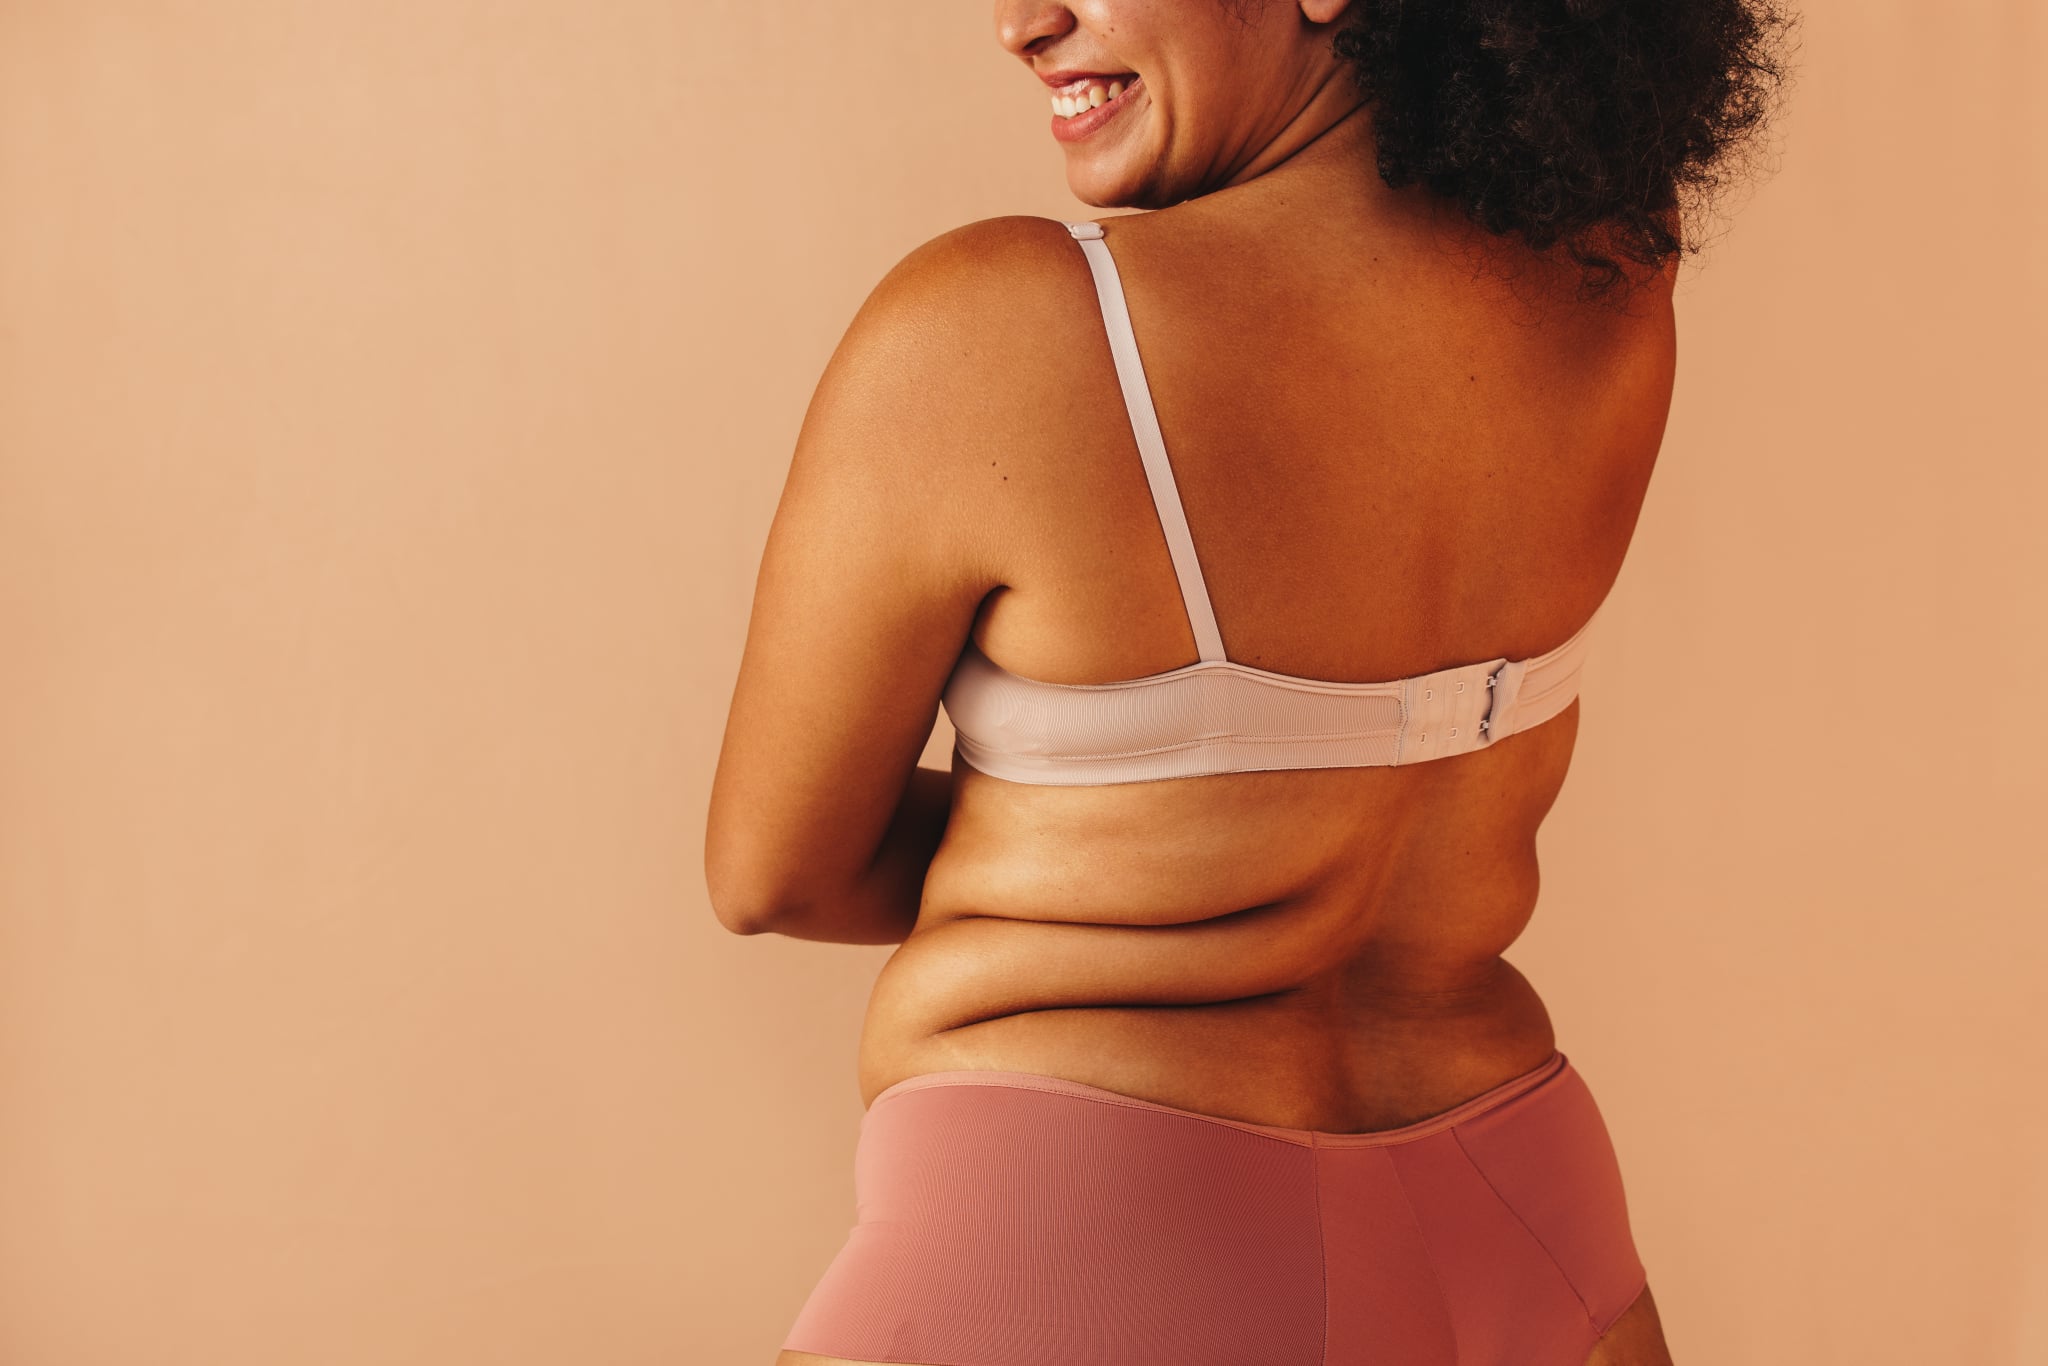 Back view of a happy curvy woman smiling cheerfully while wearing underwear in a studio. Body positive plus size woman feeling comfortable in her natural body.